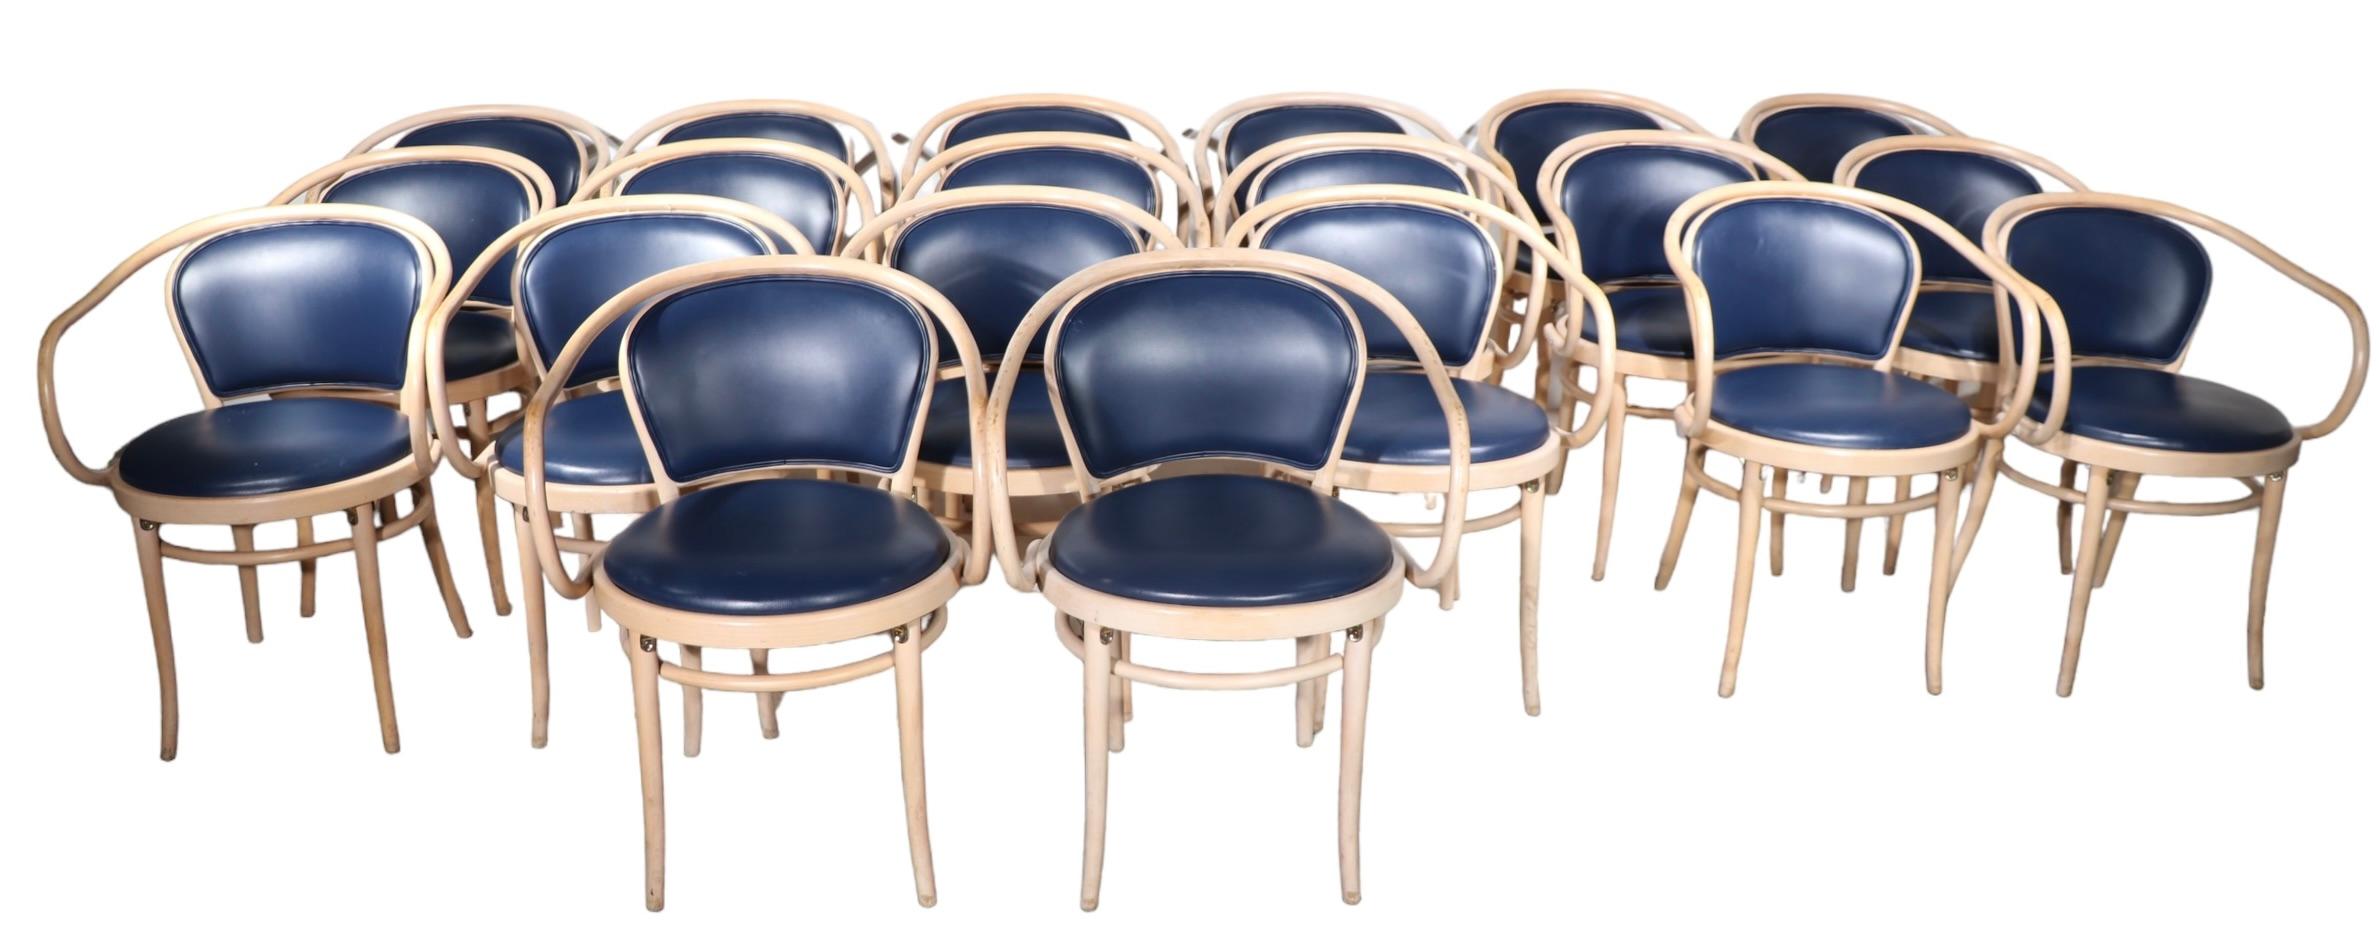 Iconic Vienna Secessionist design bentwood arm chair(s)made by TON. The chairs feature bentwood beech  frames in bleached finish, with dark blue naugahyde seats and backs, the backs of the seat backs are upholstered  in dark blue fabric. This